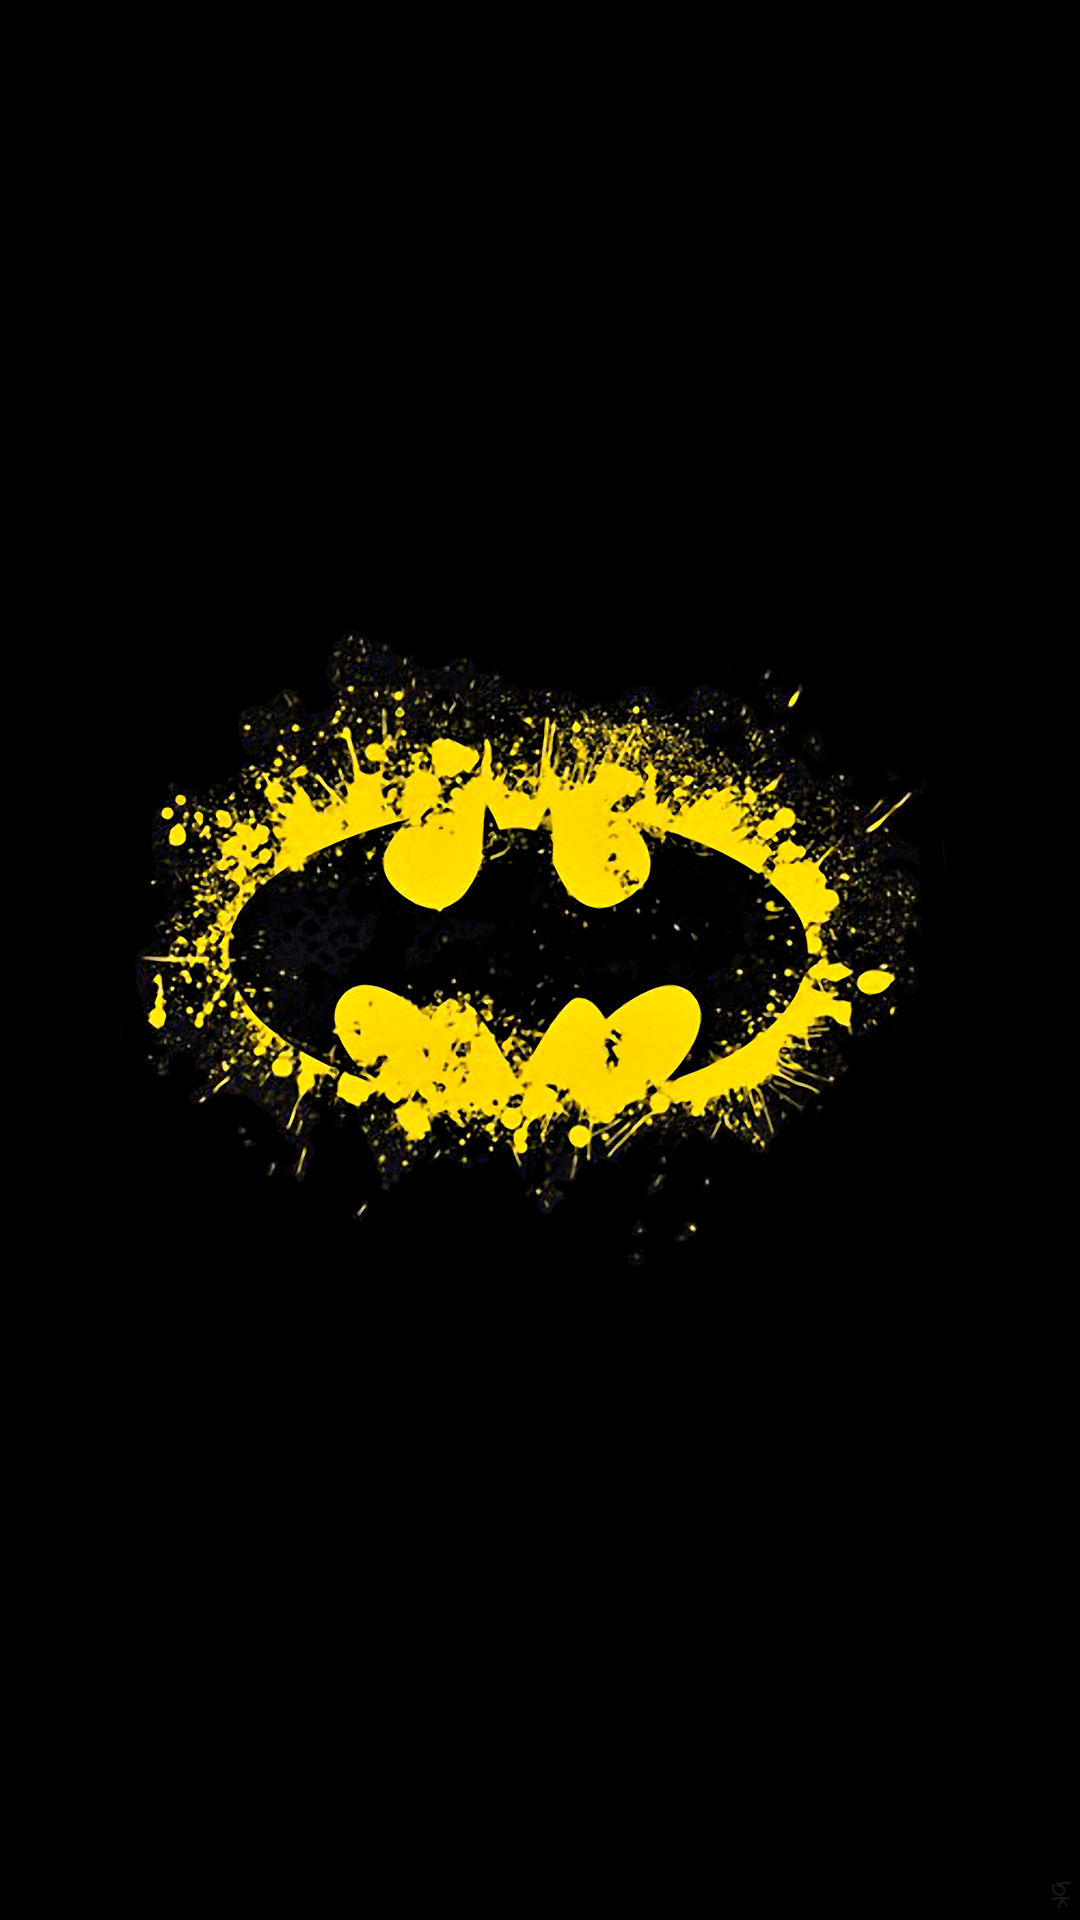 Hd Wallpapers Of Batman For Mobile